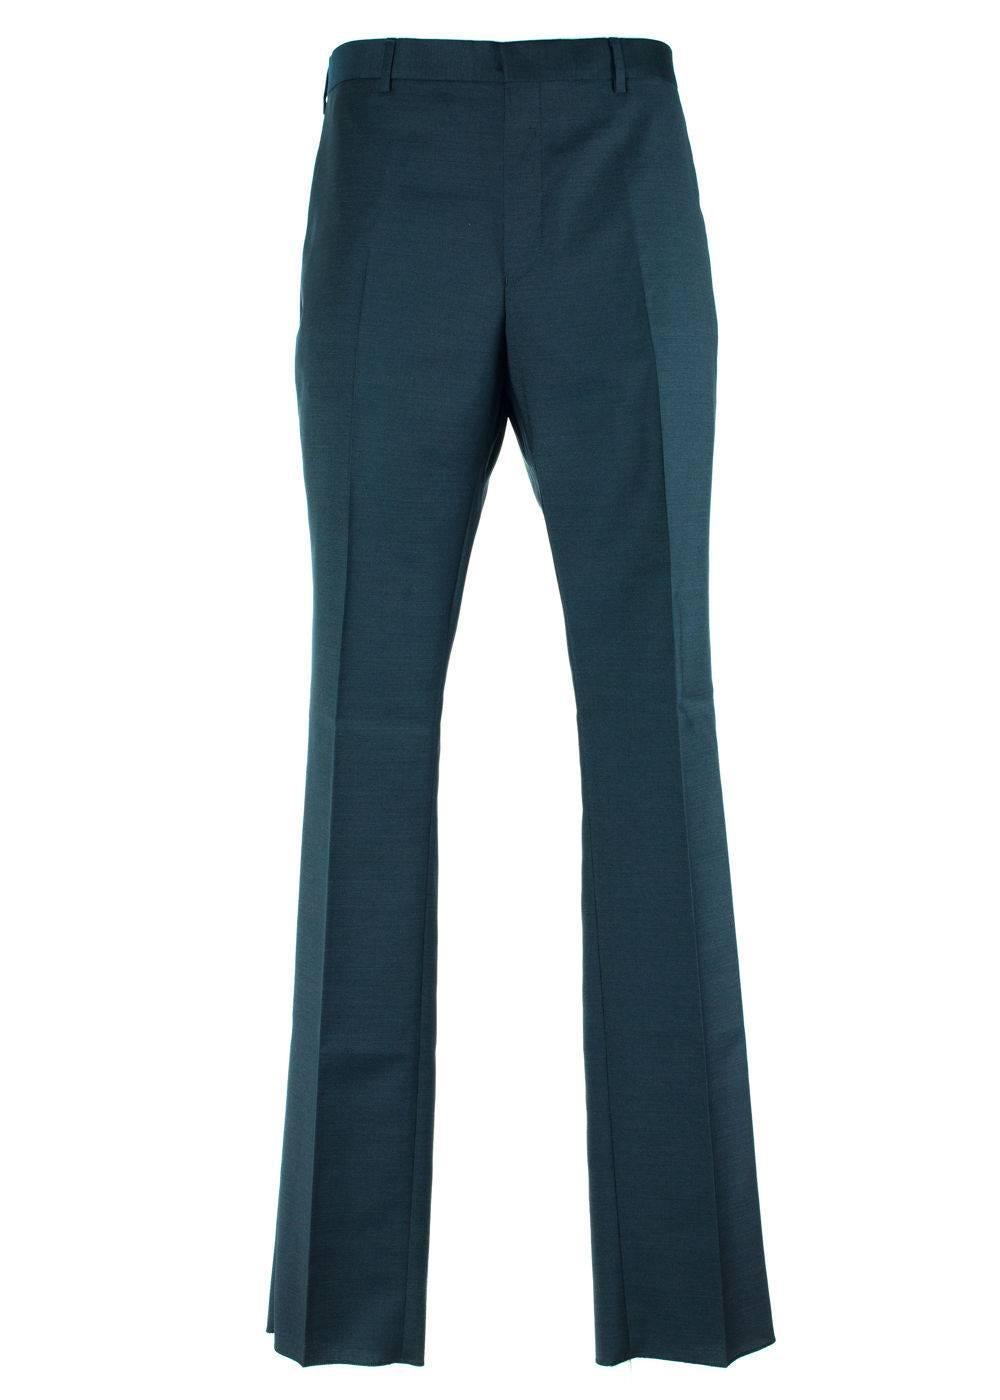 
Brand New Givenchy Men's Trousers
Original Tags
Retails in Stores & Online for $450
Men's Size E52 / US36 Fits True to Size

Classic navy trousers from fashion house Givenchy that is a mandatory must have essential for all men's closet. These